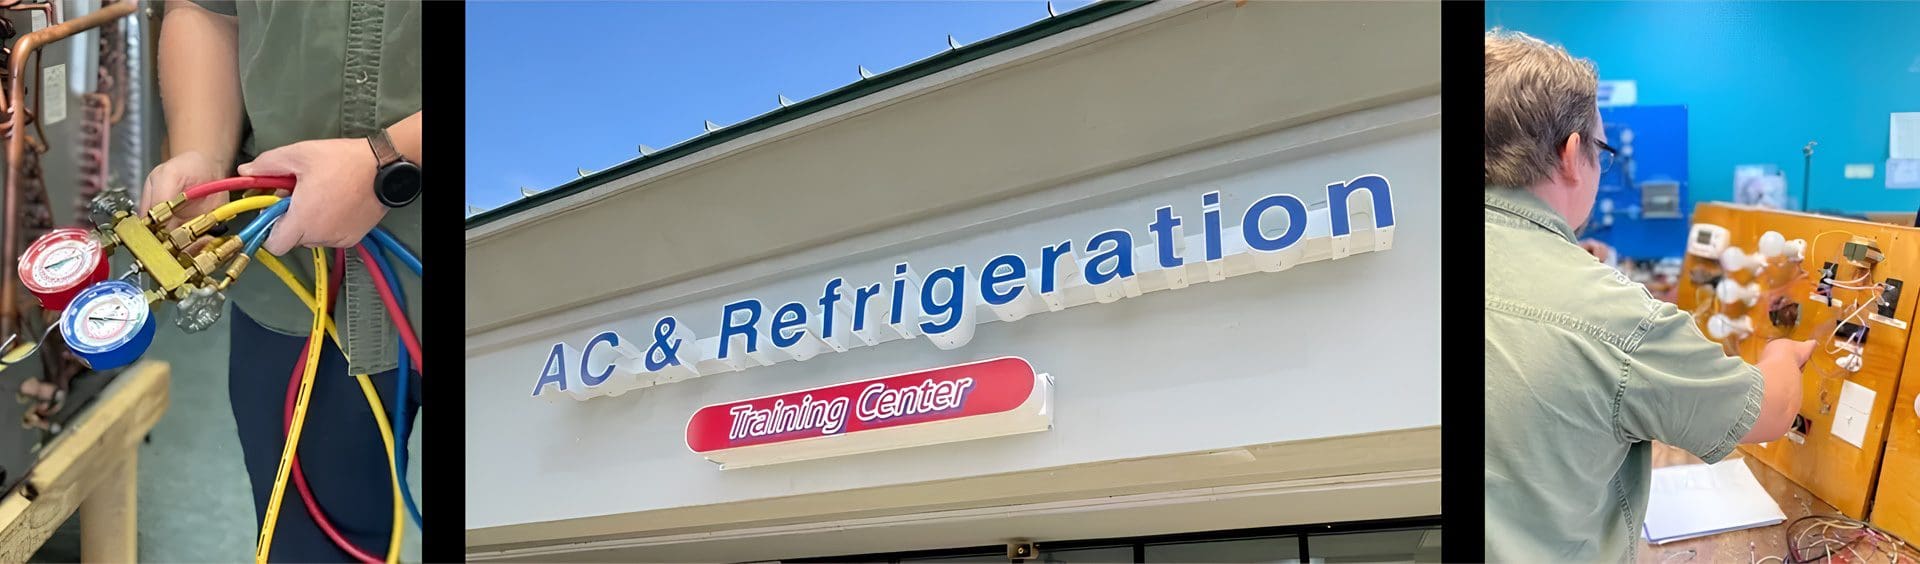 A sign for the refrigeration and bakery center.